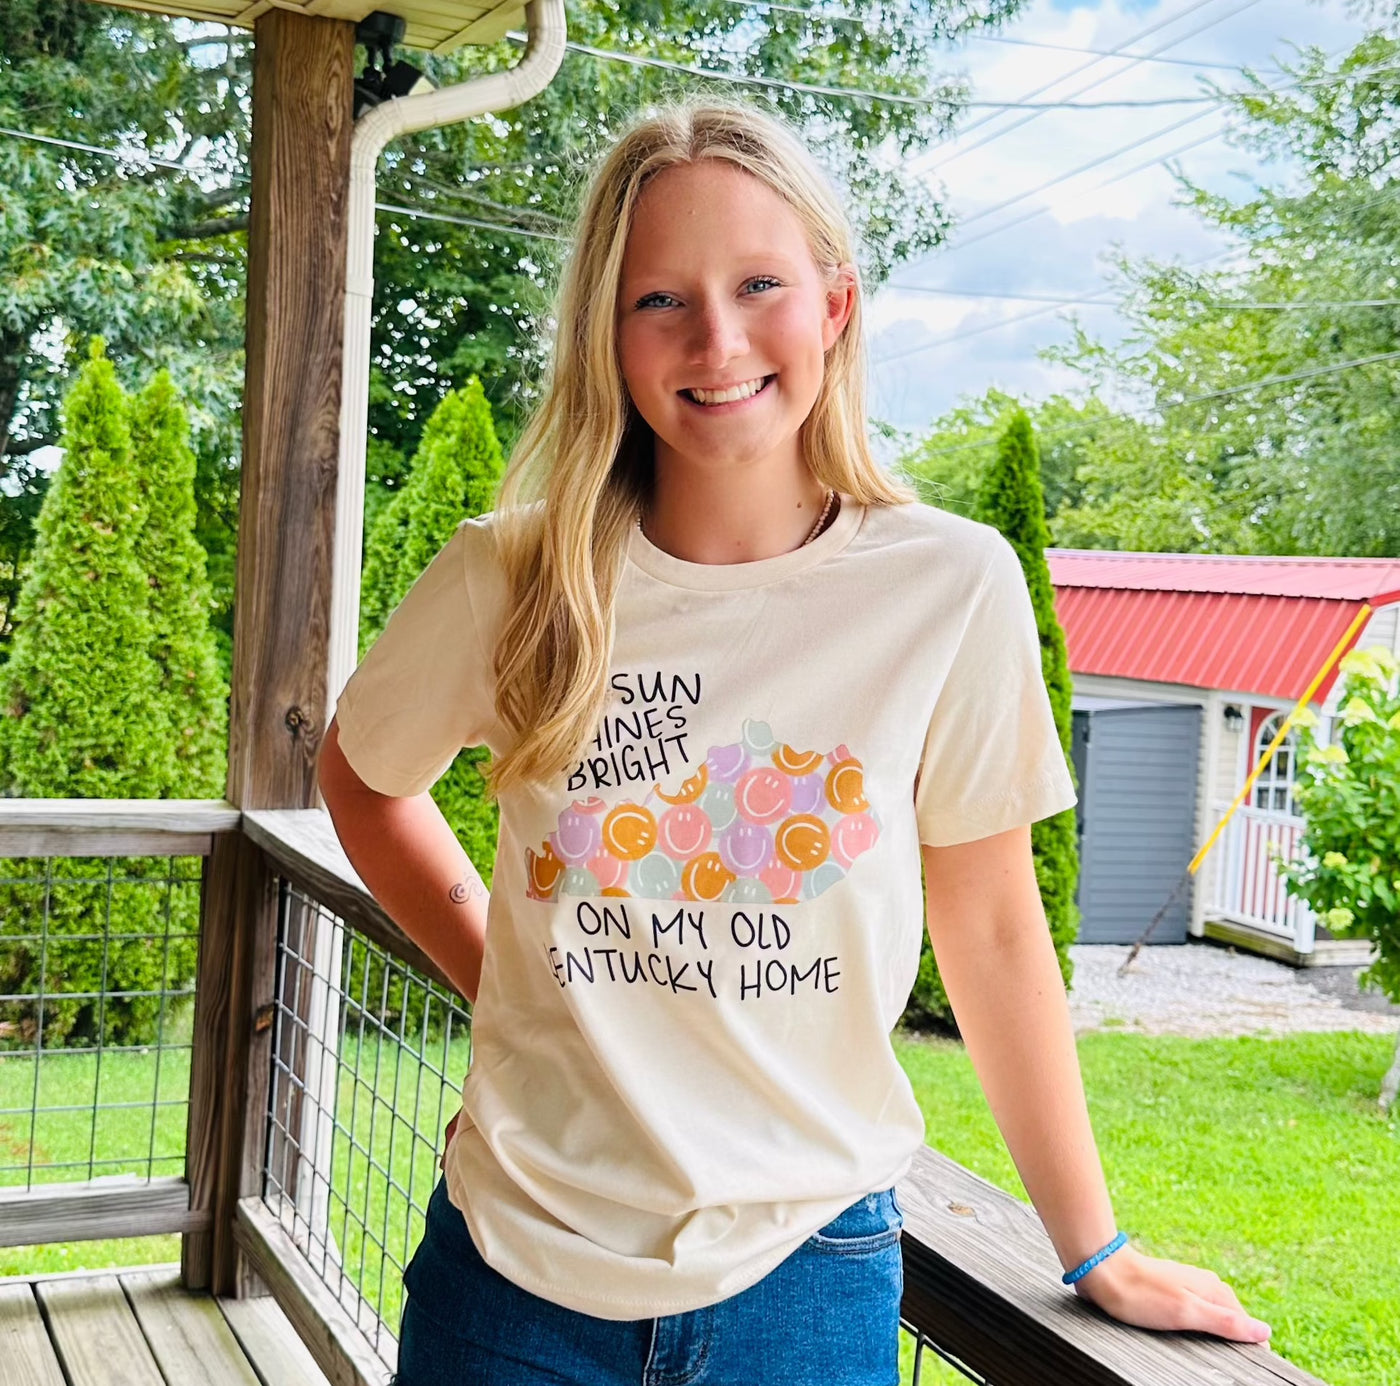 "The Sun Shines Bright on my Old Kentucky Home" Tee in Soft Cream